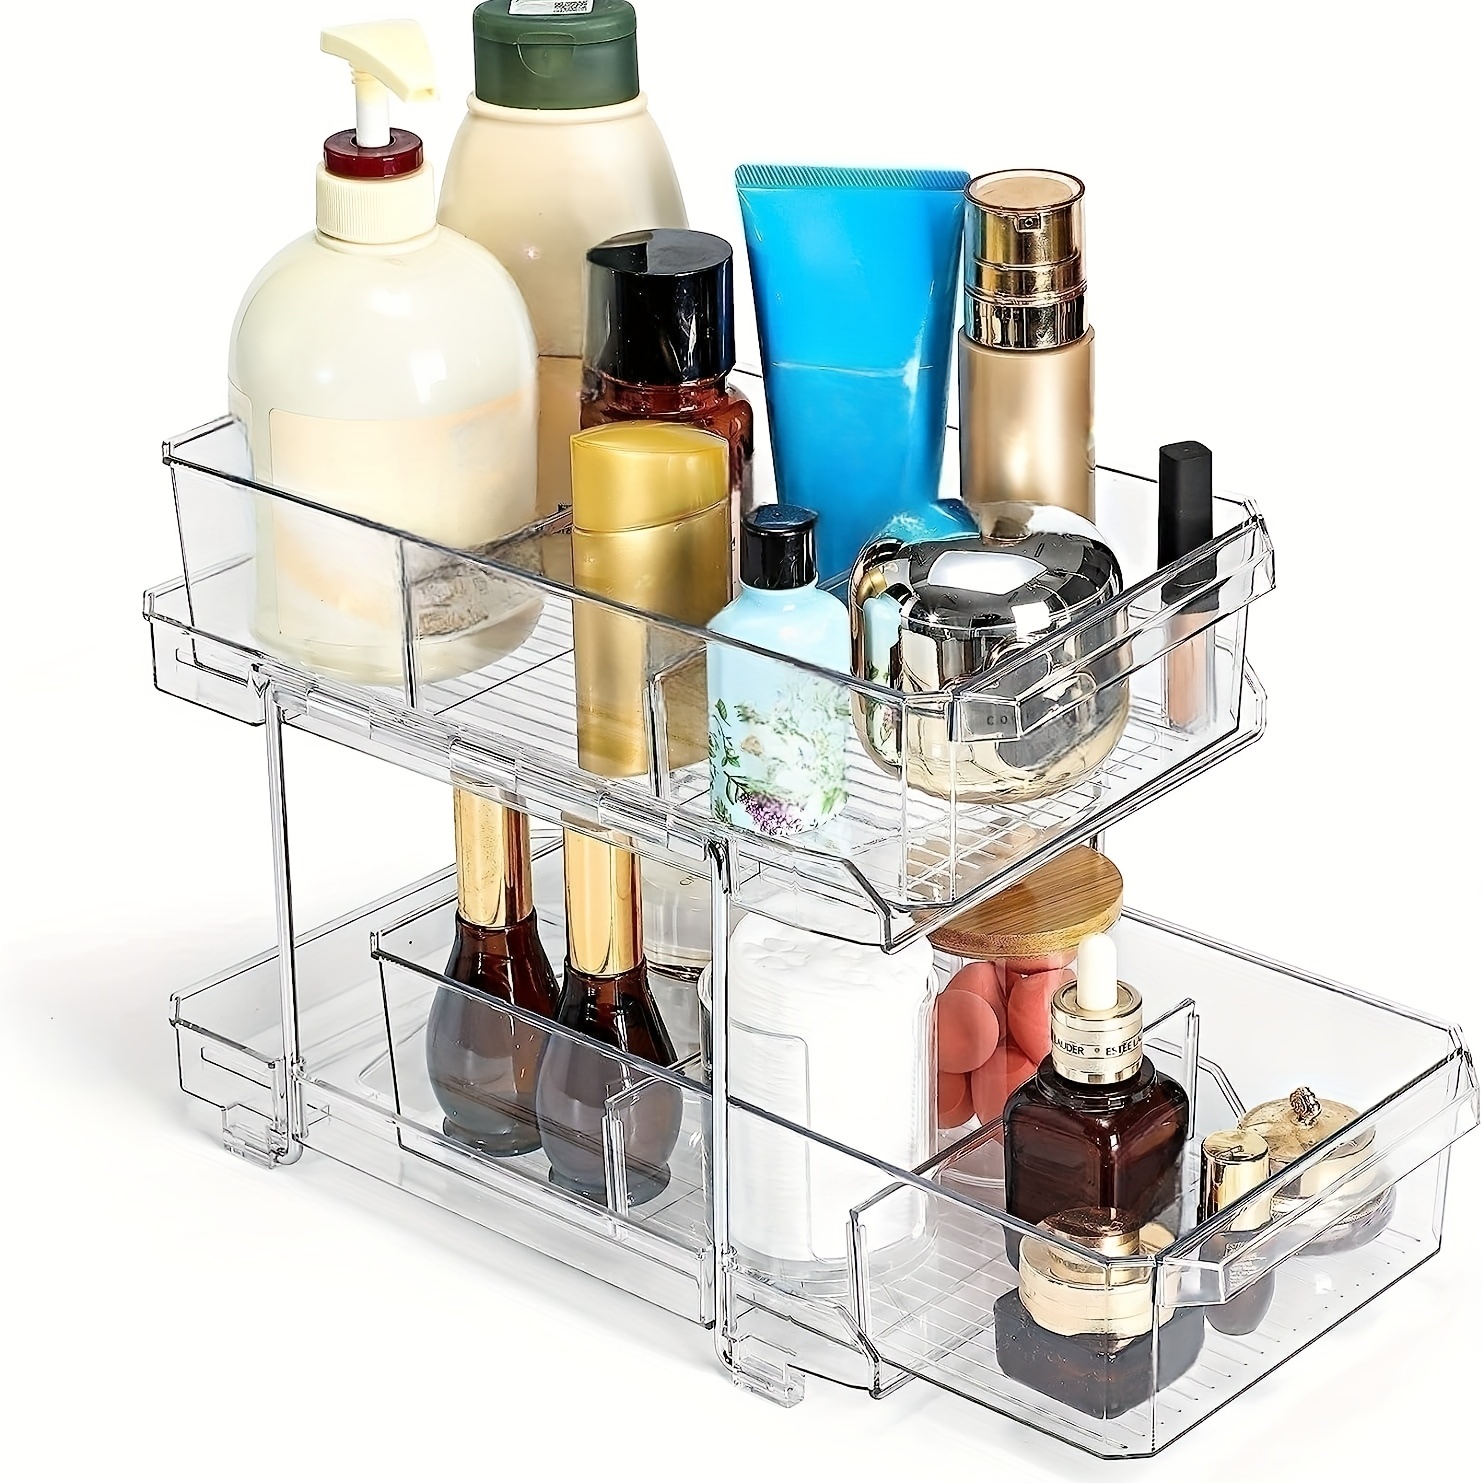 2 Tier Clear Organizer With Dividers, Multi-Purpose Slide-Out Storage  Container